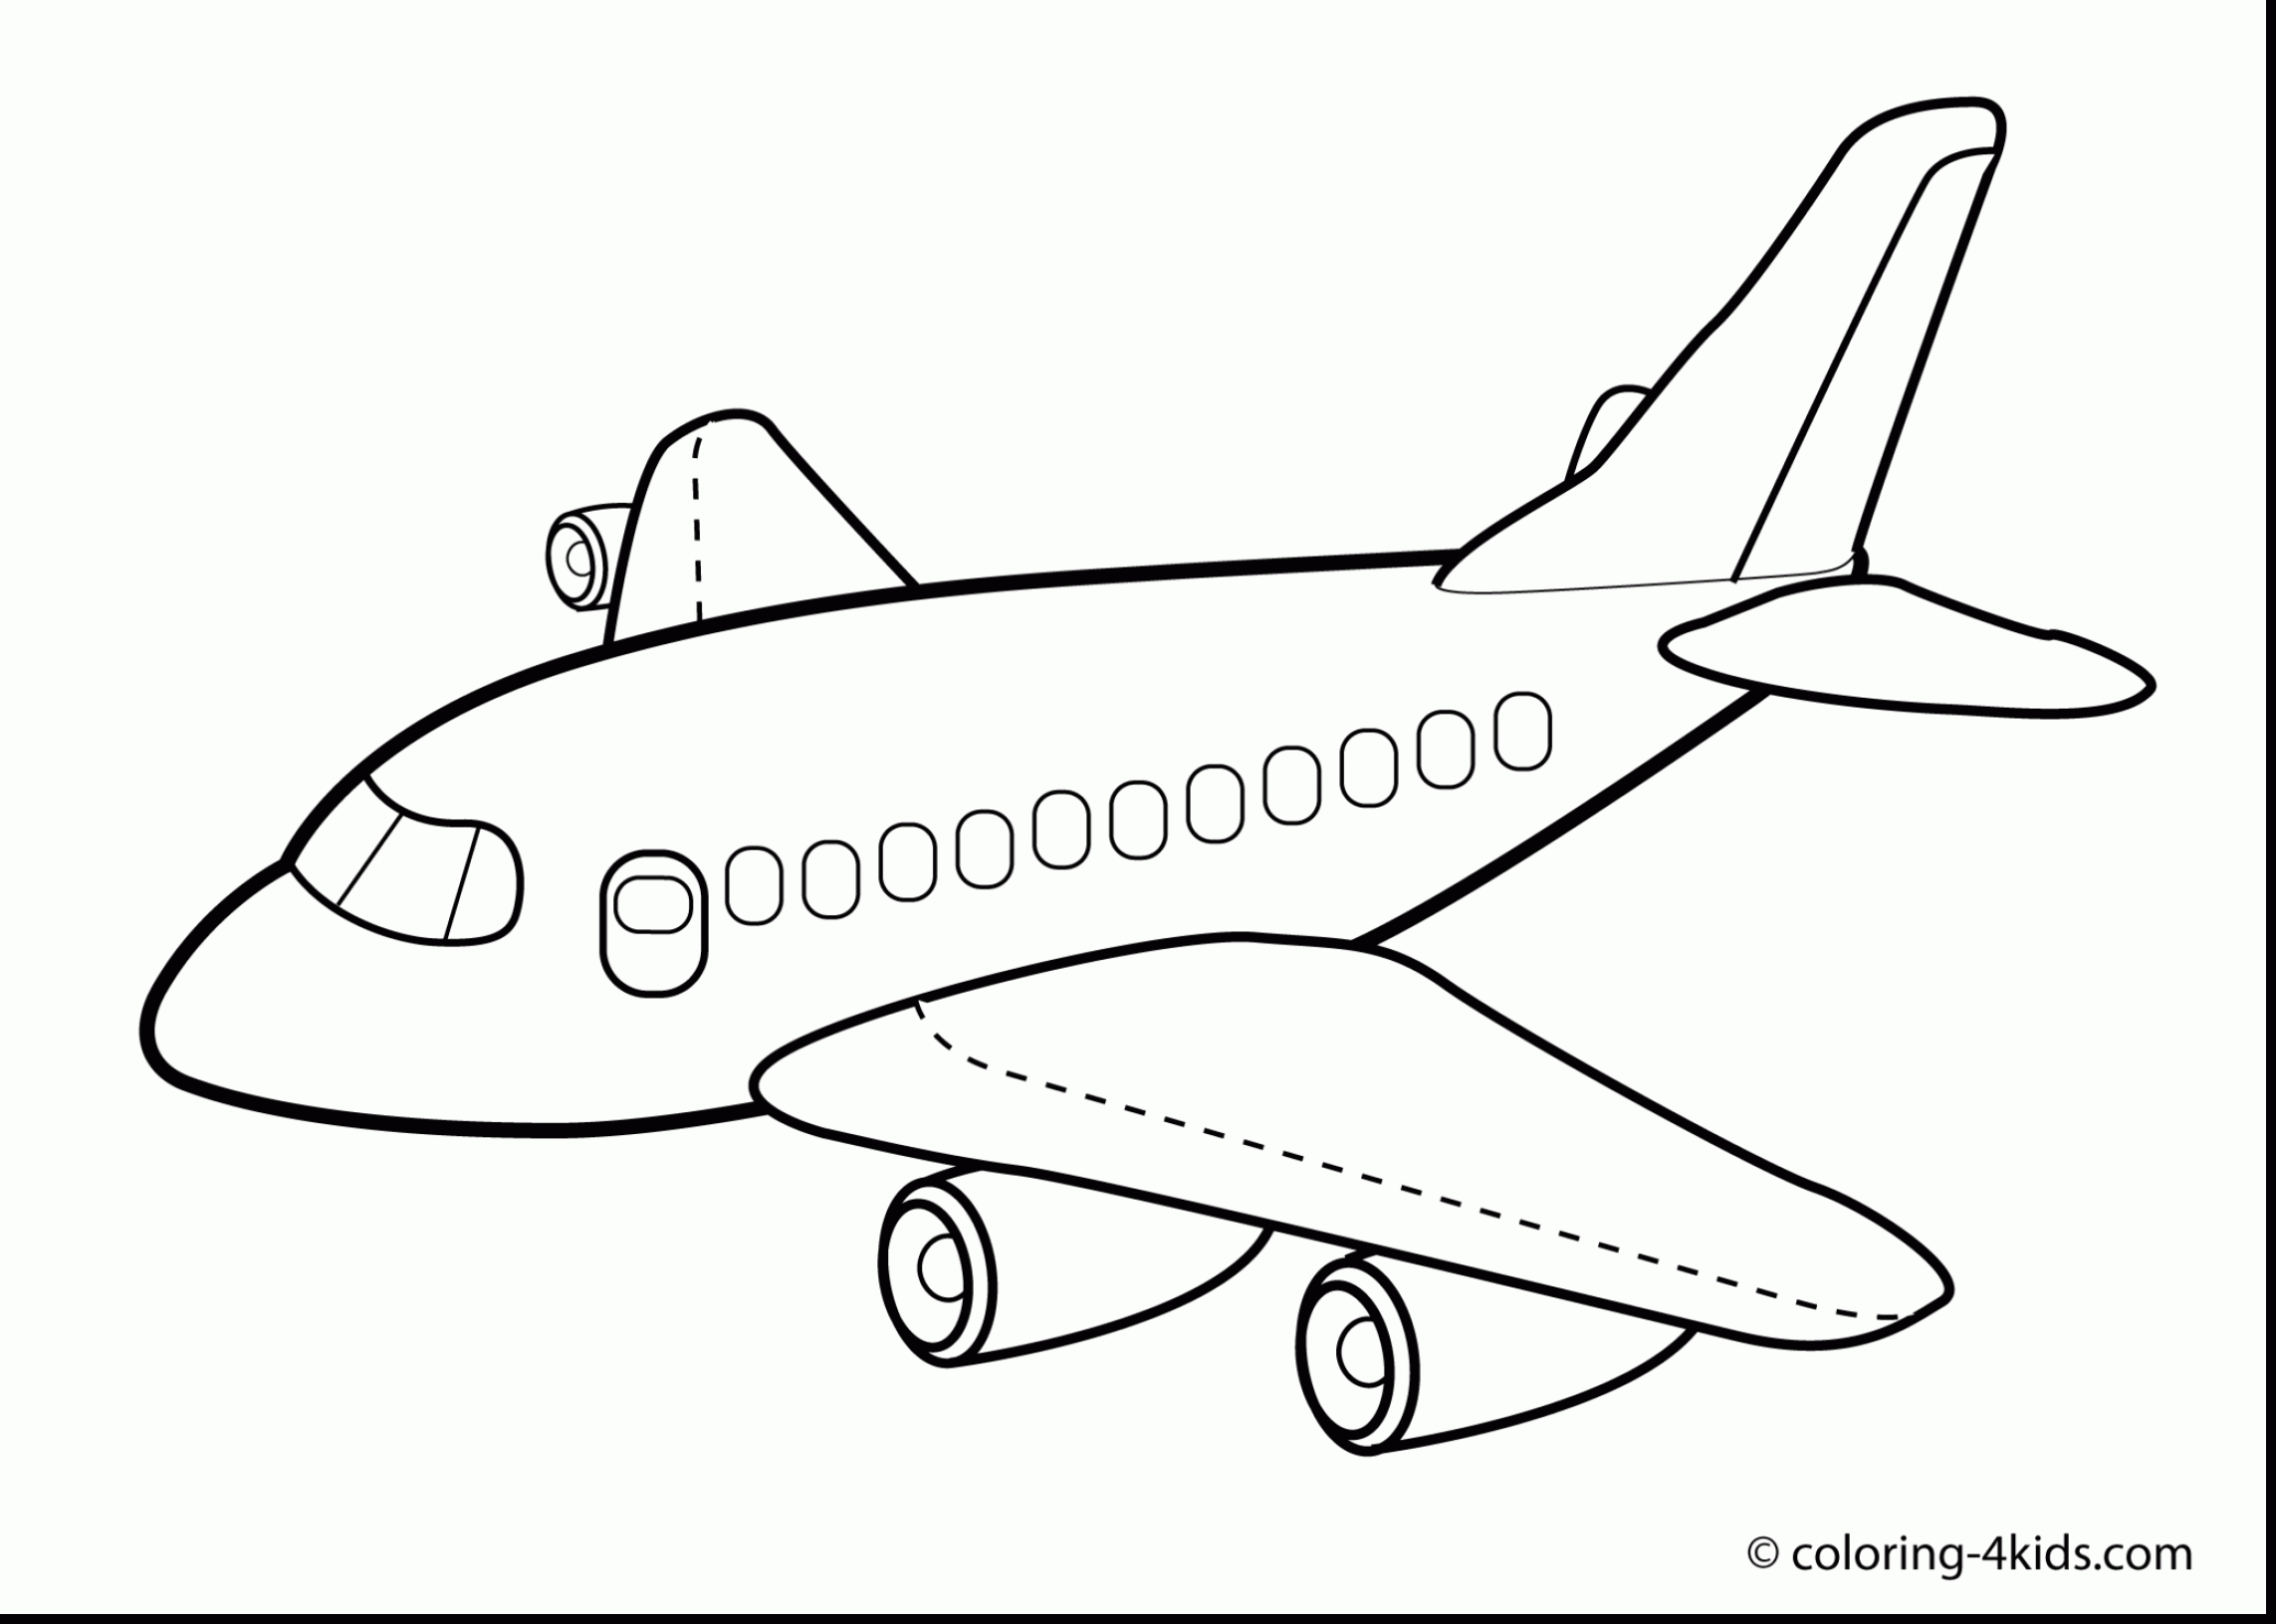 Aeroplane Coloring Pages For Kids at GetColorings.com | Free printable